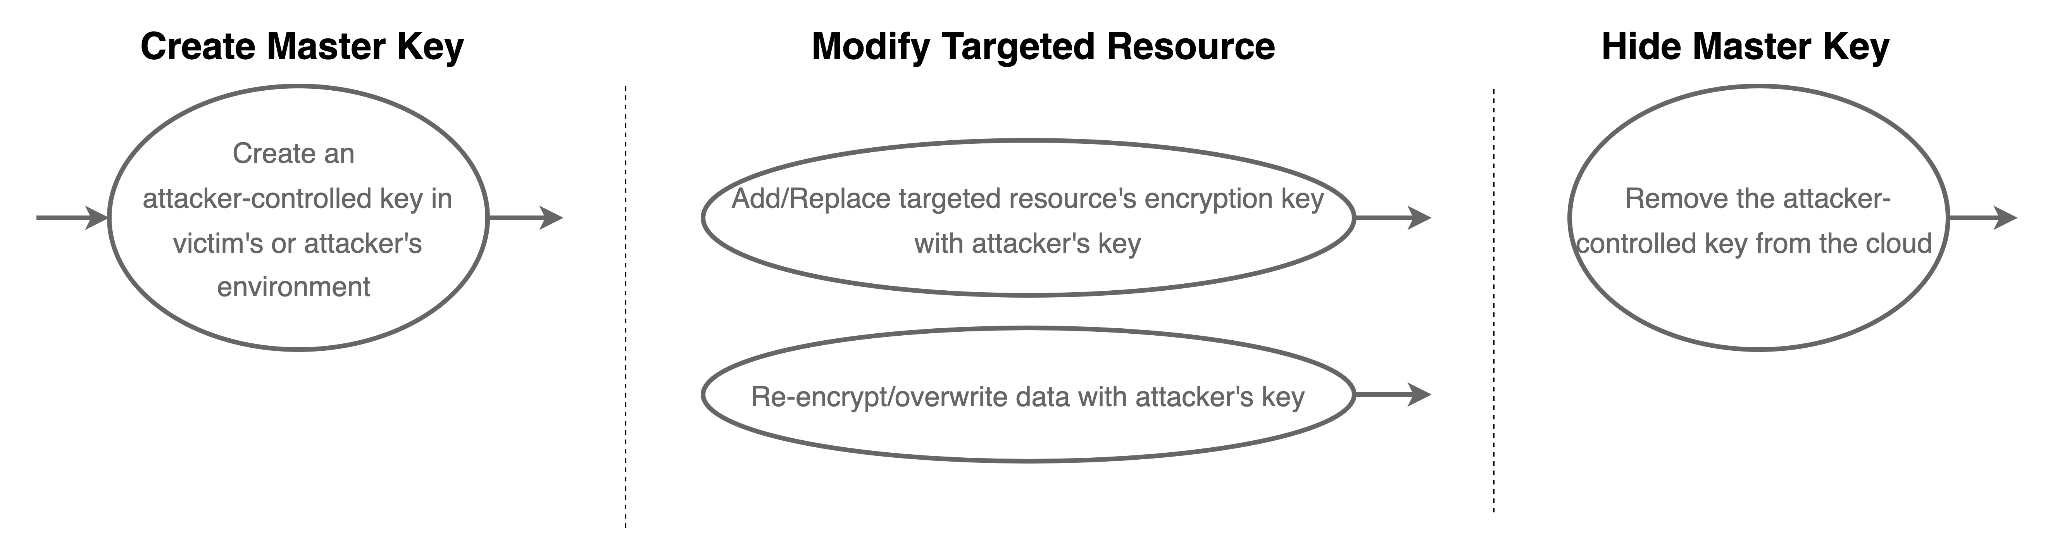 Hypothetical attack scenario for ransomware in public clouds. The graphic shows three stages: 1) Create Master Key - create an attacker-controlled key in victim's or attacker's environment. 2) Modify Targeted Resource - add/replace targeted resource's encryption key with attacker's key, re-encrypt/overwrite data with attacker's key; 3) Hide Master Key - remove the attacker-controlled key from the cloud. 